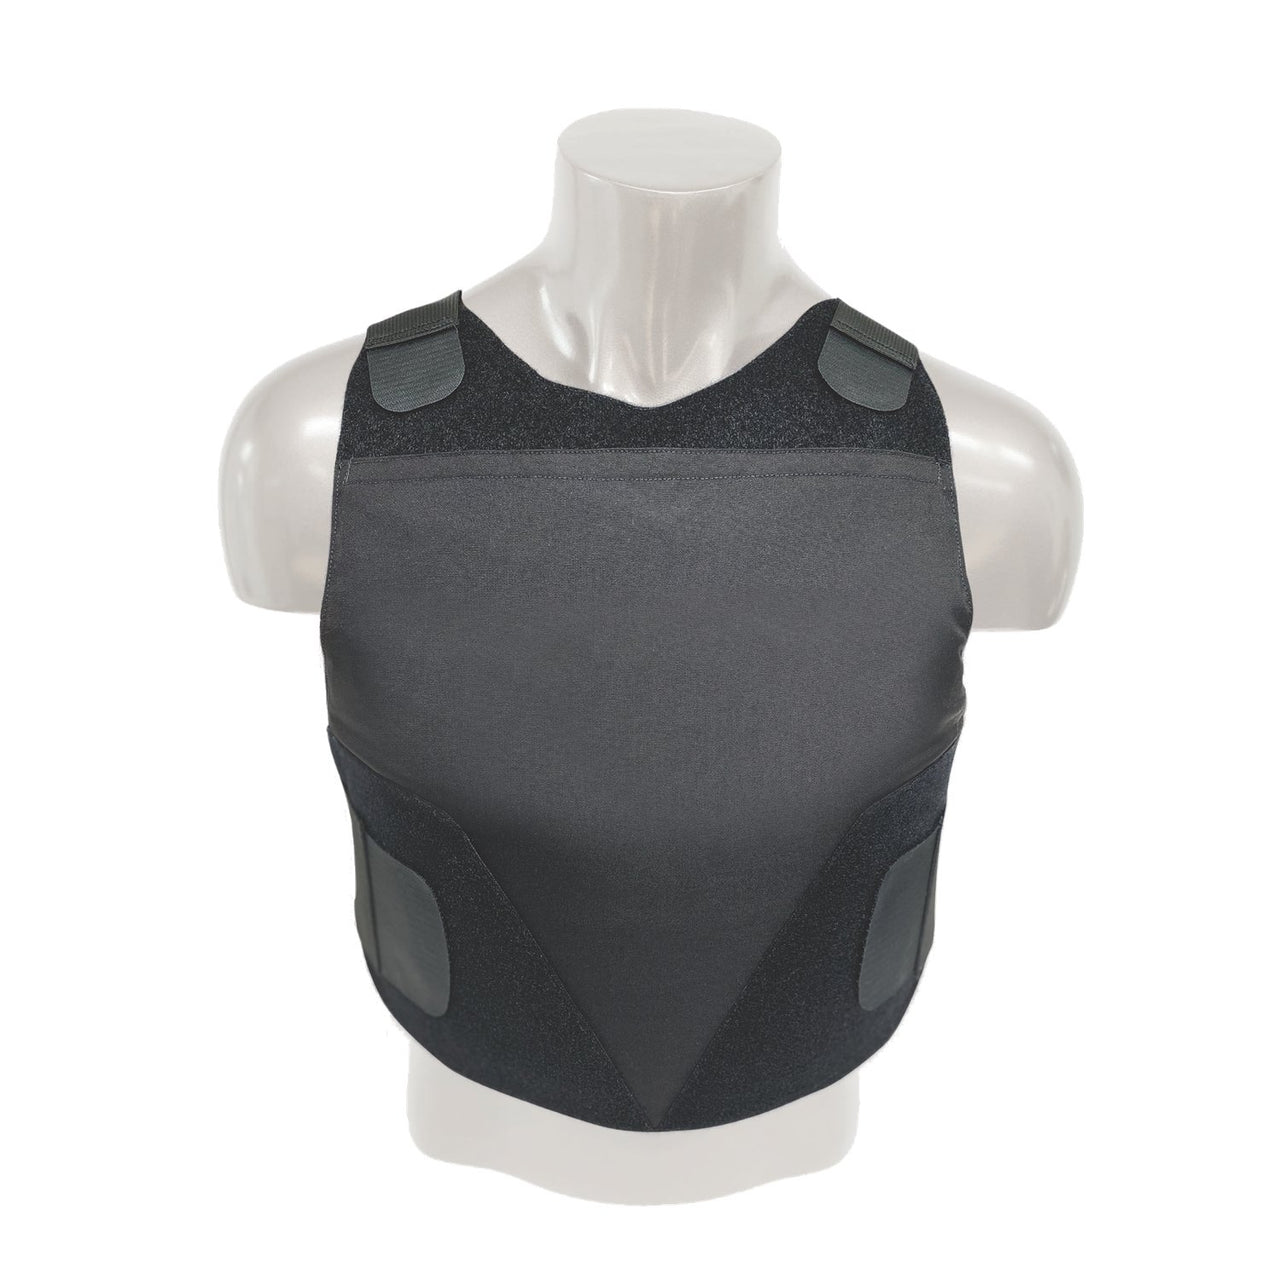 A Body Armor Direct All American Concealable Carrier with a black vest.